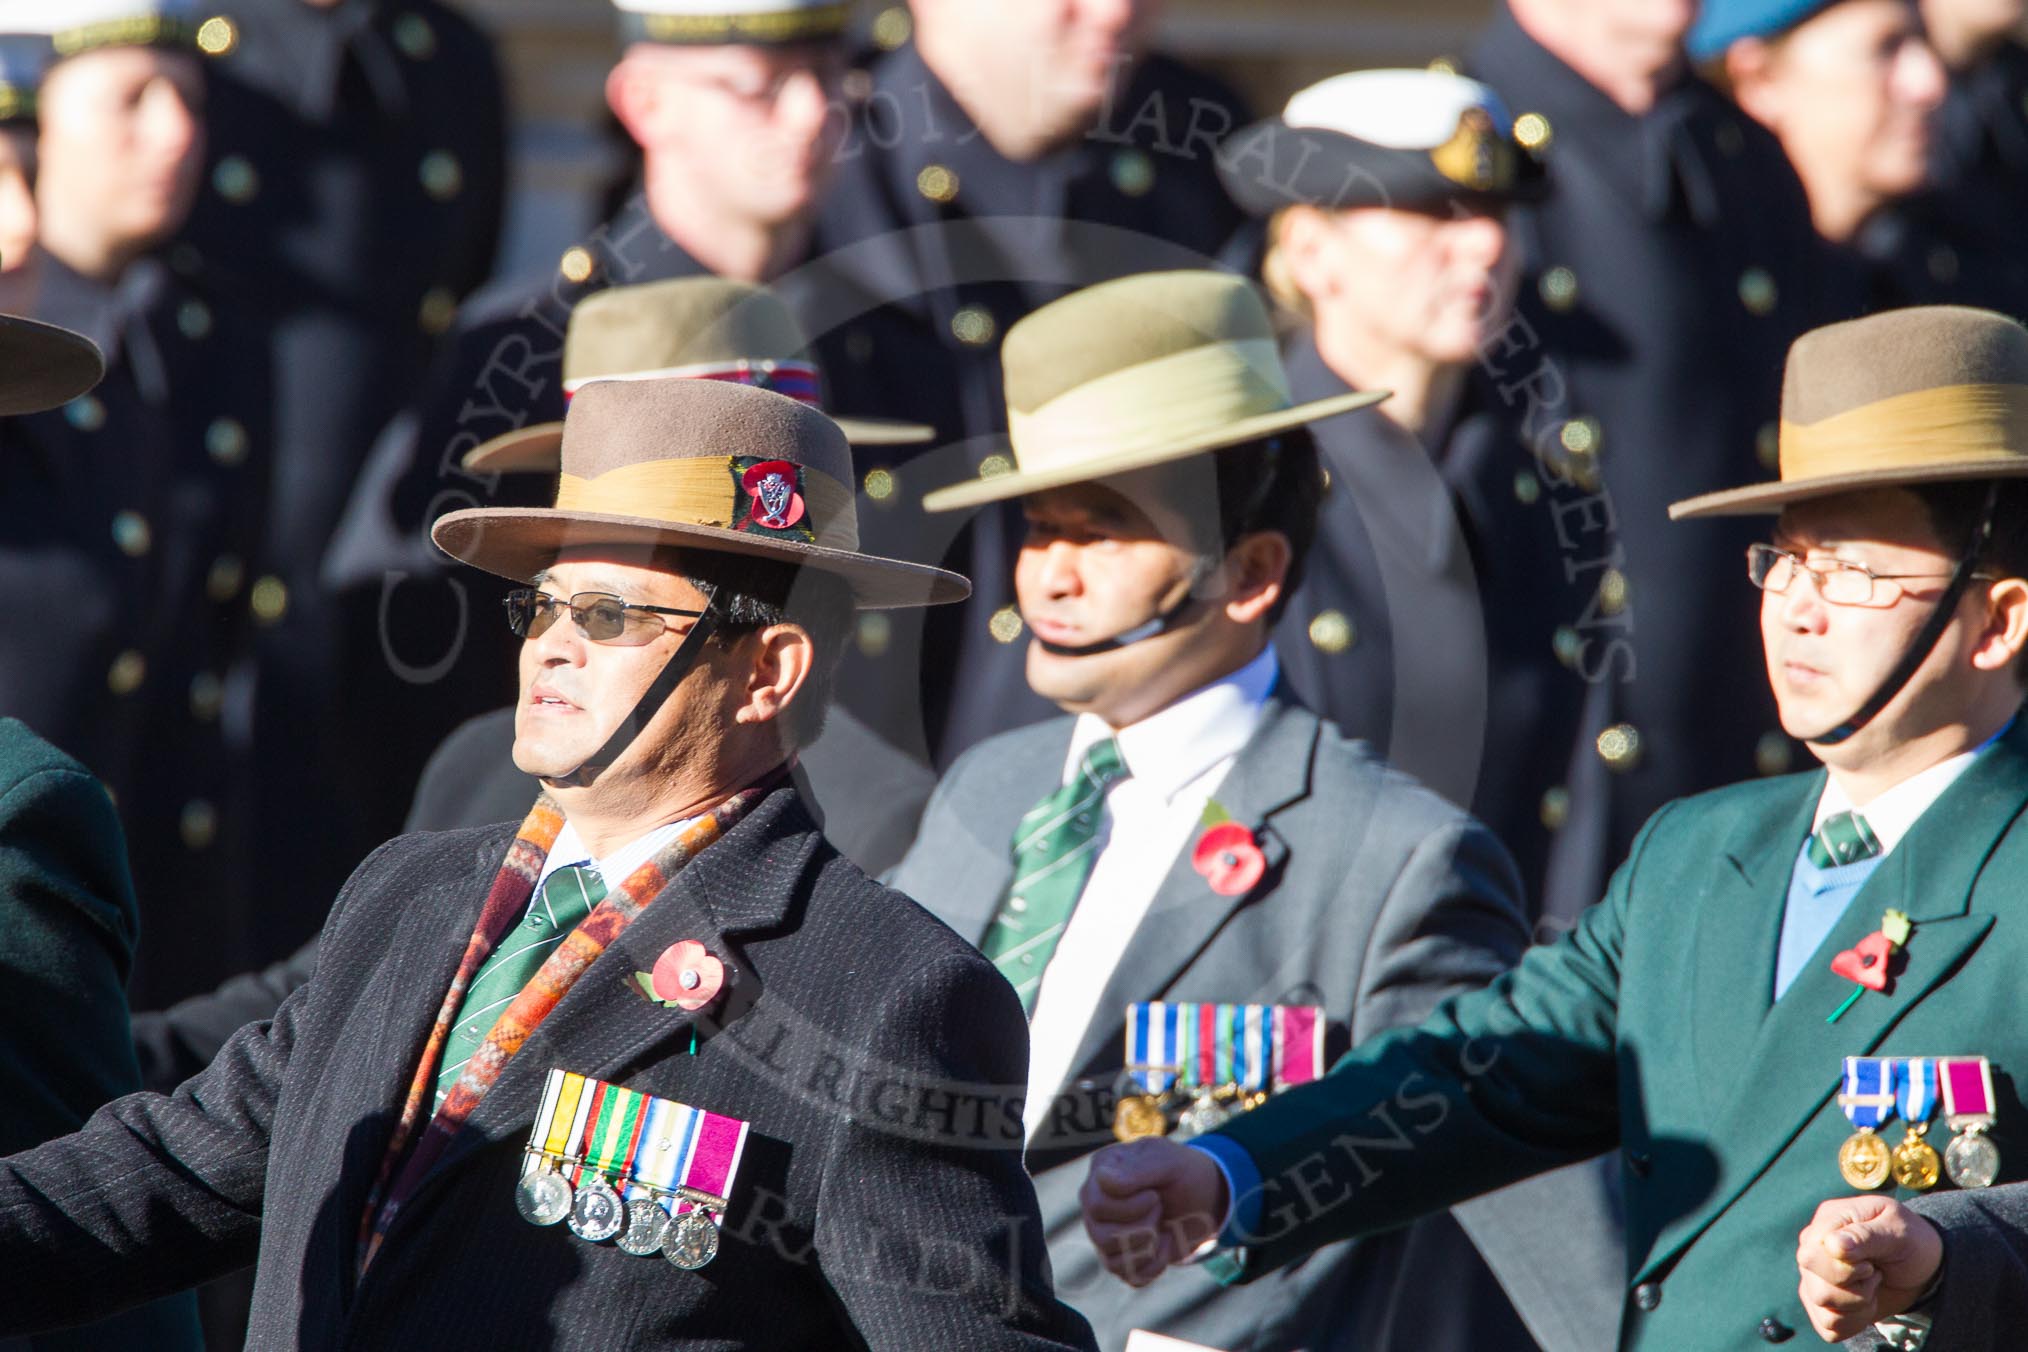 Remembrance Sunday Cenotaph March Past 2013: D2 - British Gurkha Welfare Association..
Press stand opposite the Foreign Office building, Whitehall, London SW1,
London,
Greater London,
United Kingdom,
on 10 November 2013 at 11:39, image #44